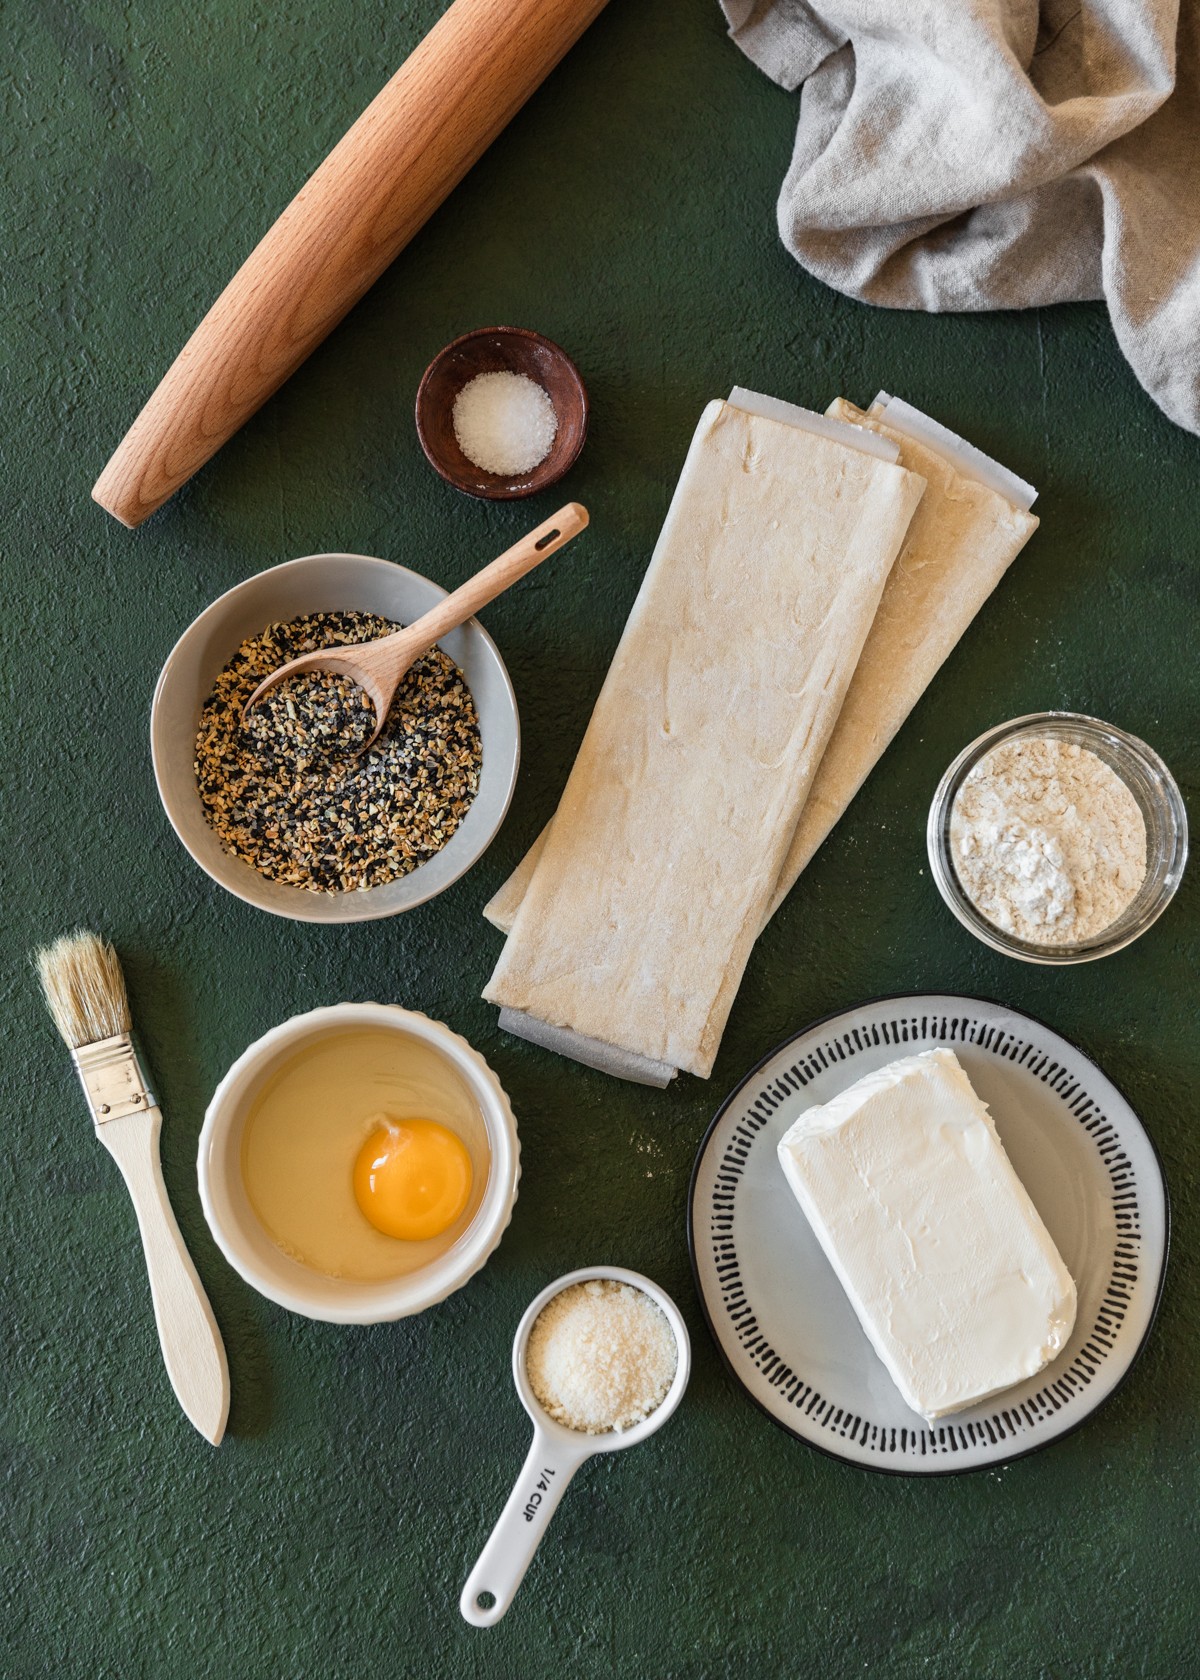 An overhead image of puff pastry, a jar of flour, a grey bowl of everything spice, a white plate with cream cheese, a white bowl with an egg, a rolling pin, and a pastry brush on an emerald green table.